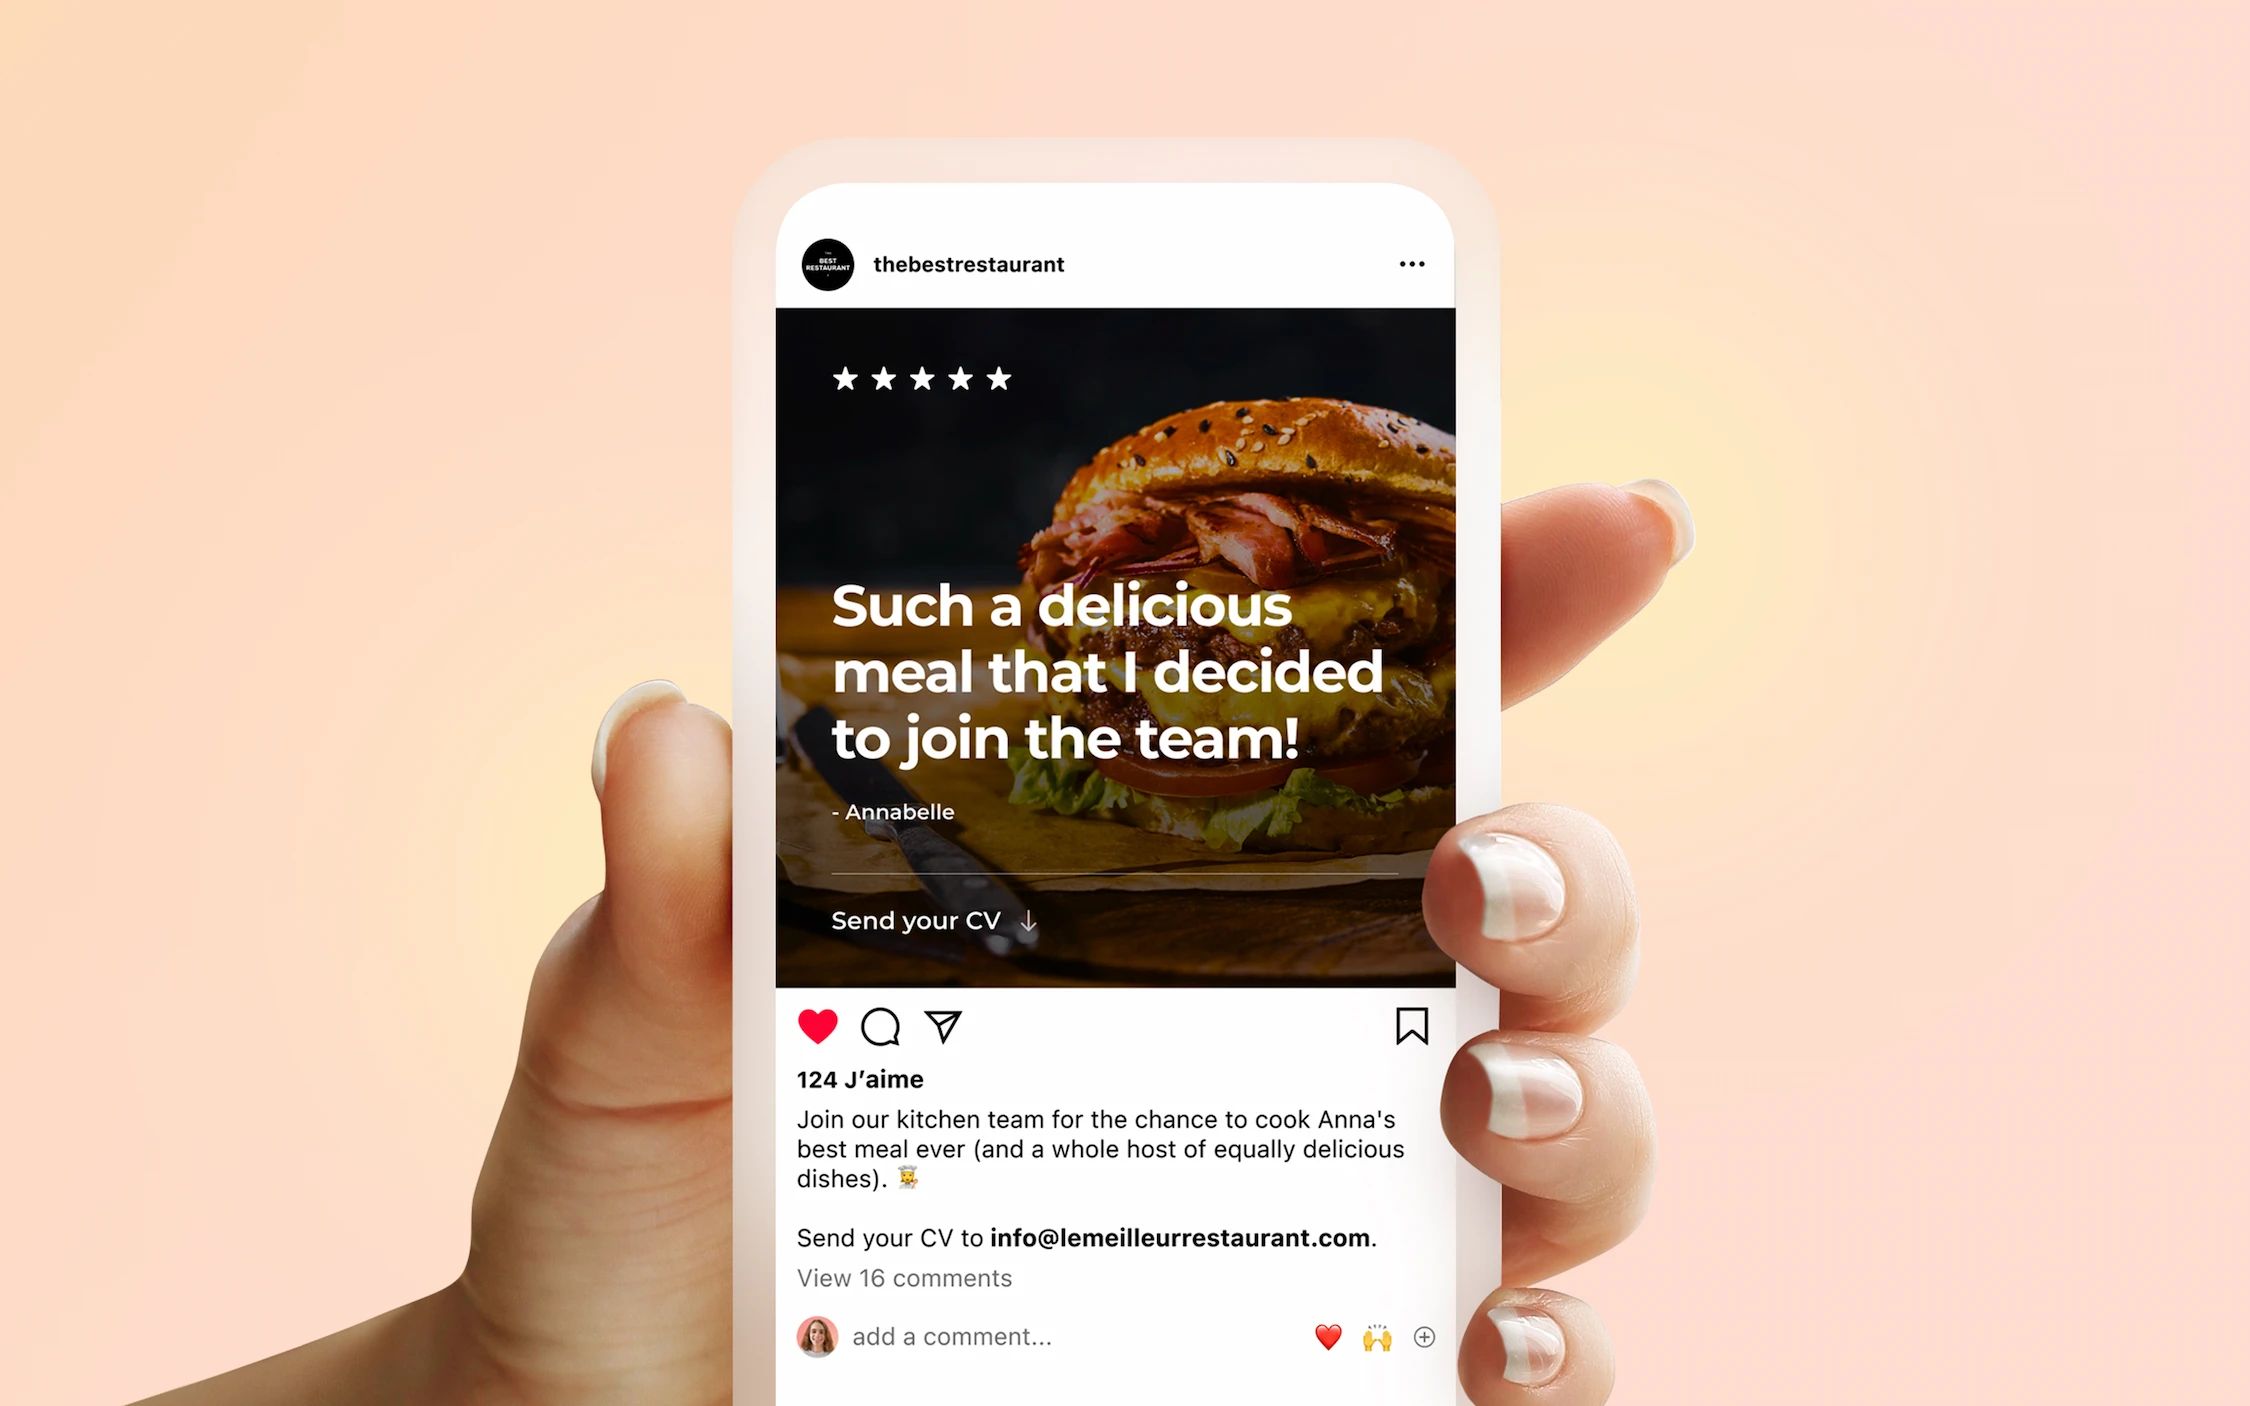 Hand holding a smartphone with an Instagram feed showing a burger photo.